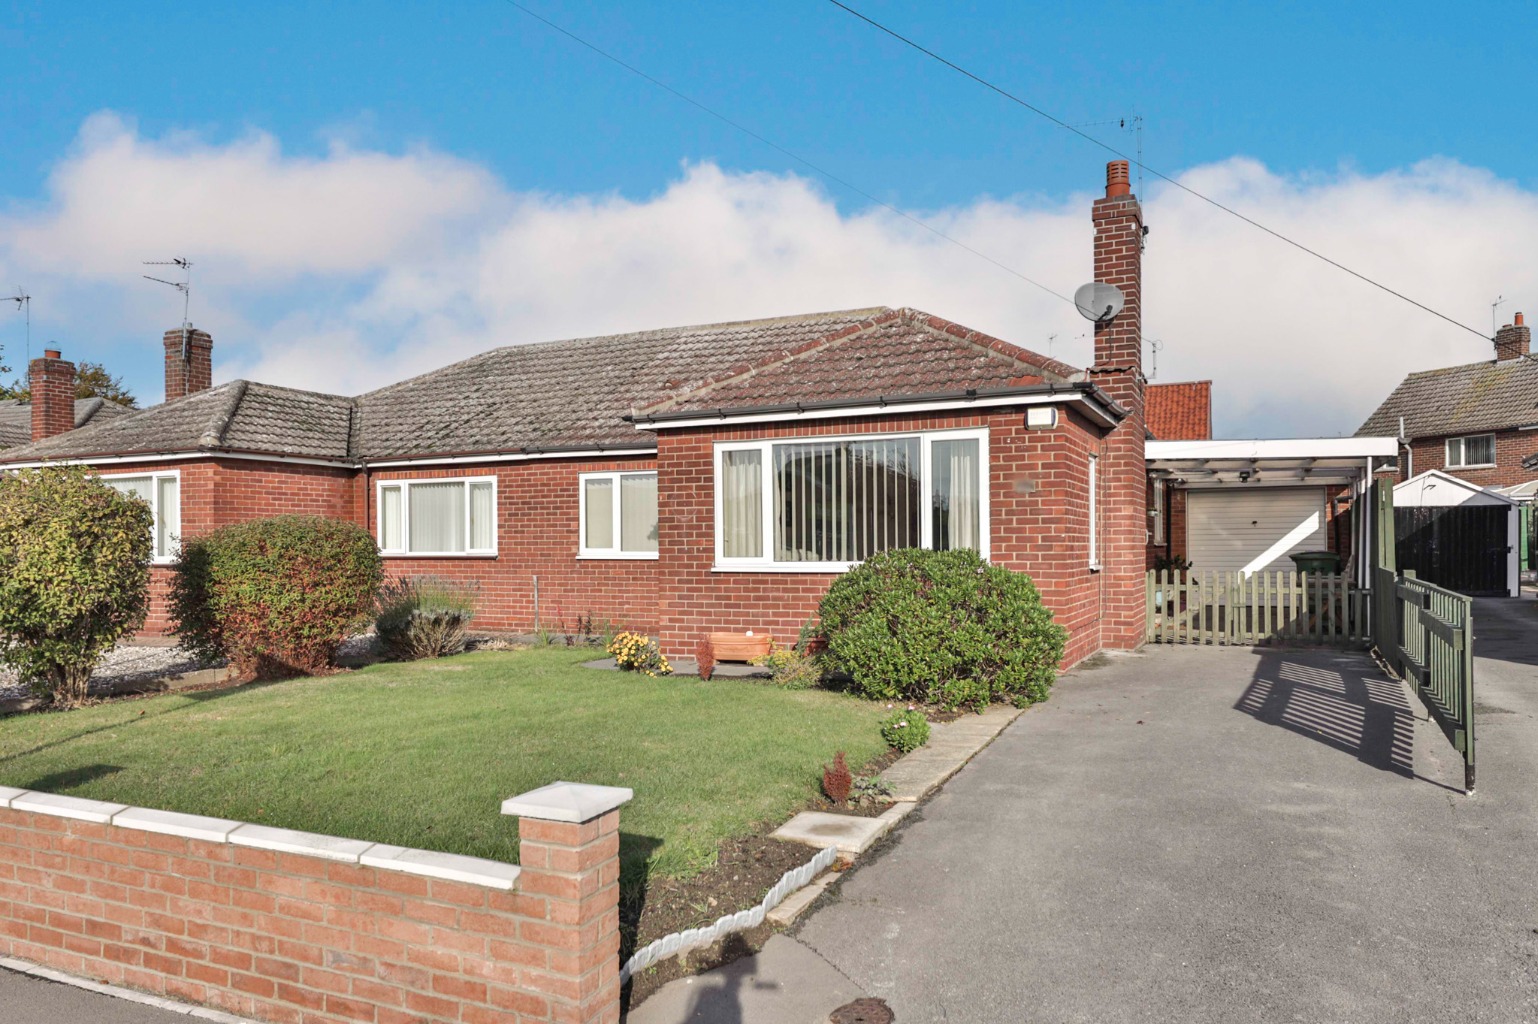 2 bed semi-detached bungalow for sale in Sandfield Drive, Brough, HU15